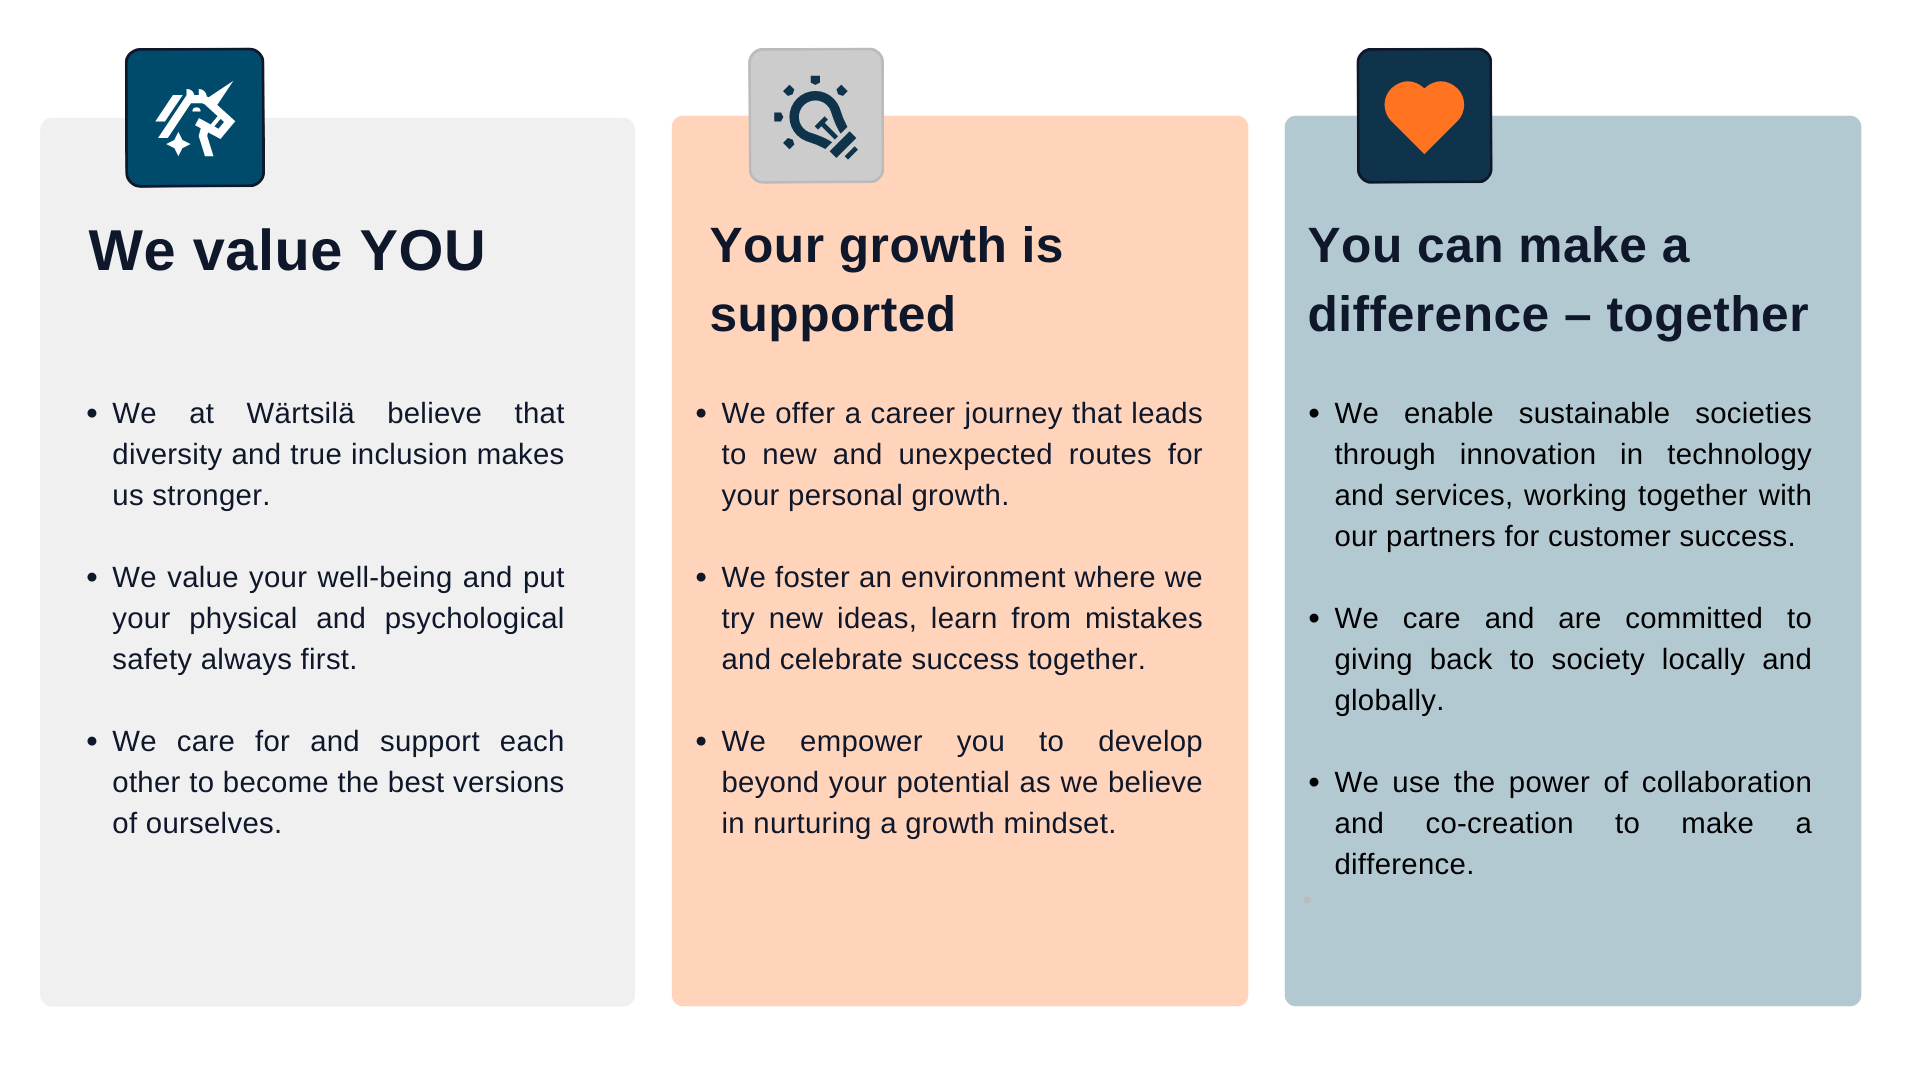 1. We value YOU. 2. Your growth is supported. 3. You can make a difference - together.